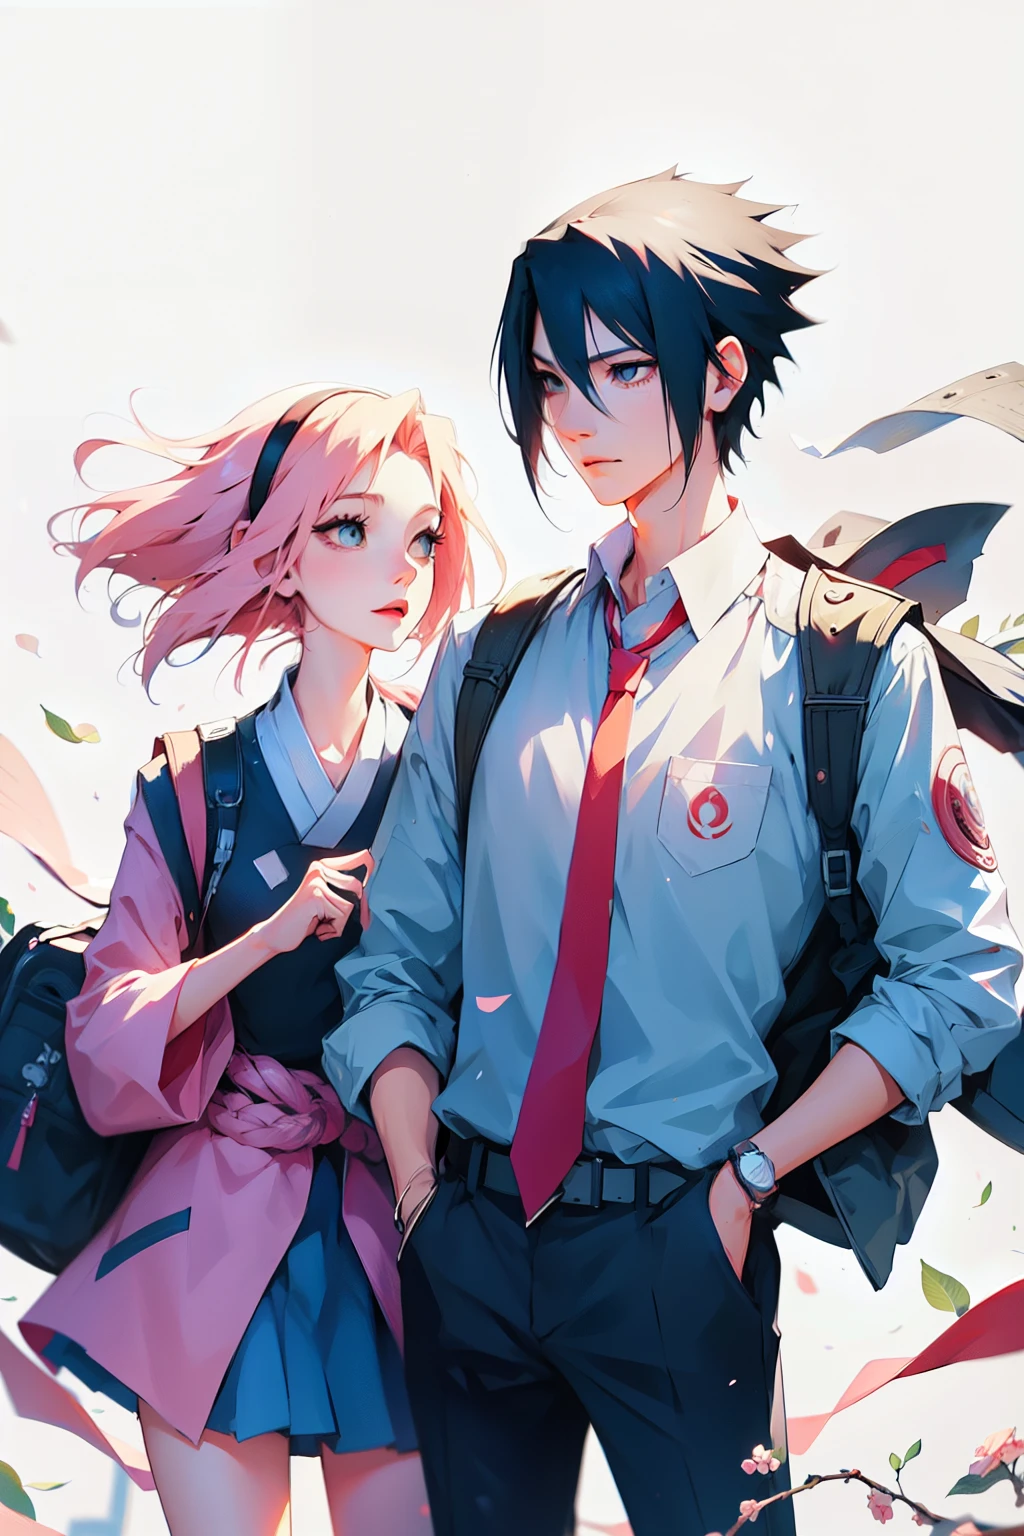 sasusaku. Sasuke Uchiha, a tall man with black hair and wearing a , is a student and has his hands in his pockets. Sakura, a thin woman with pink hair, is a student and has her hands in her pockets. best quality, adorable, ultra-detailed, illustration, complex, detailed, extremely detailed, detailed face, soft light, soft focus, perfect face. In love, illustration. two people, couple,